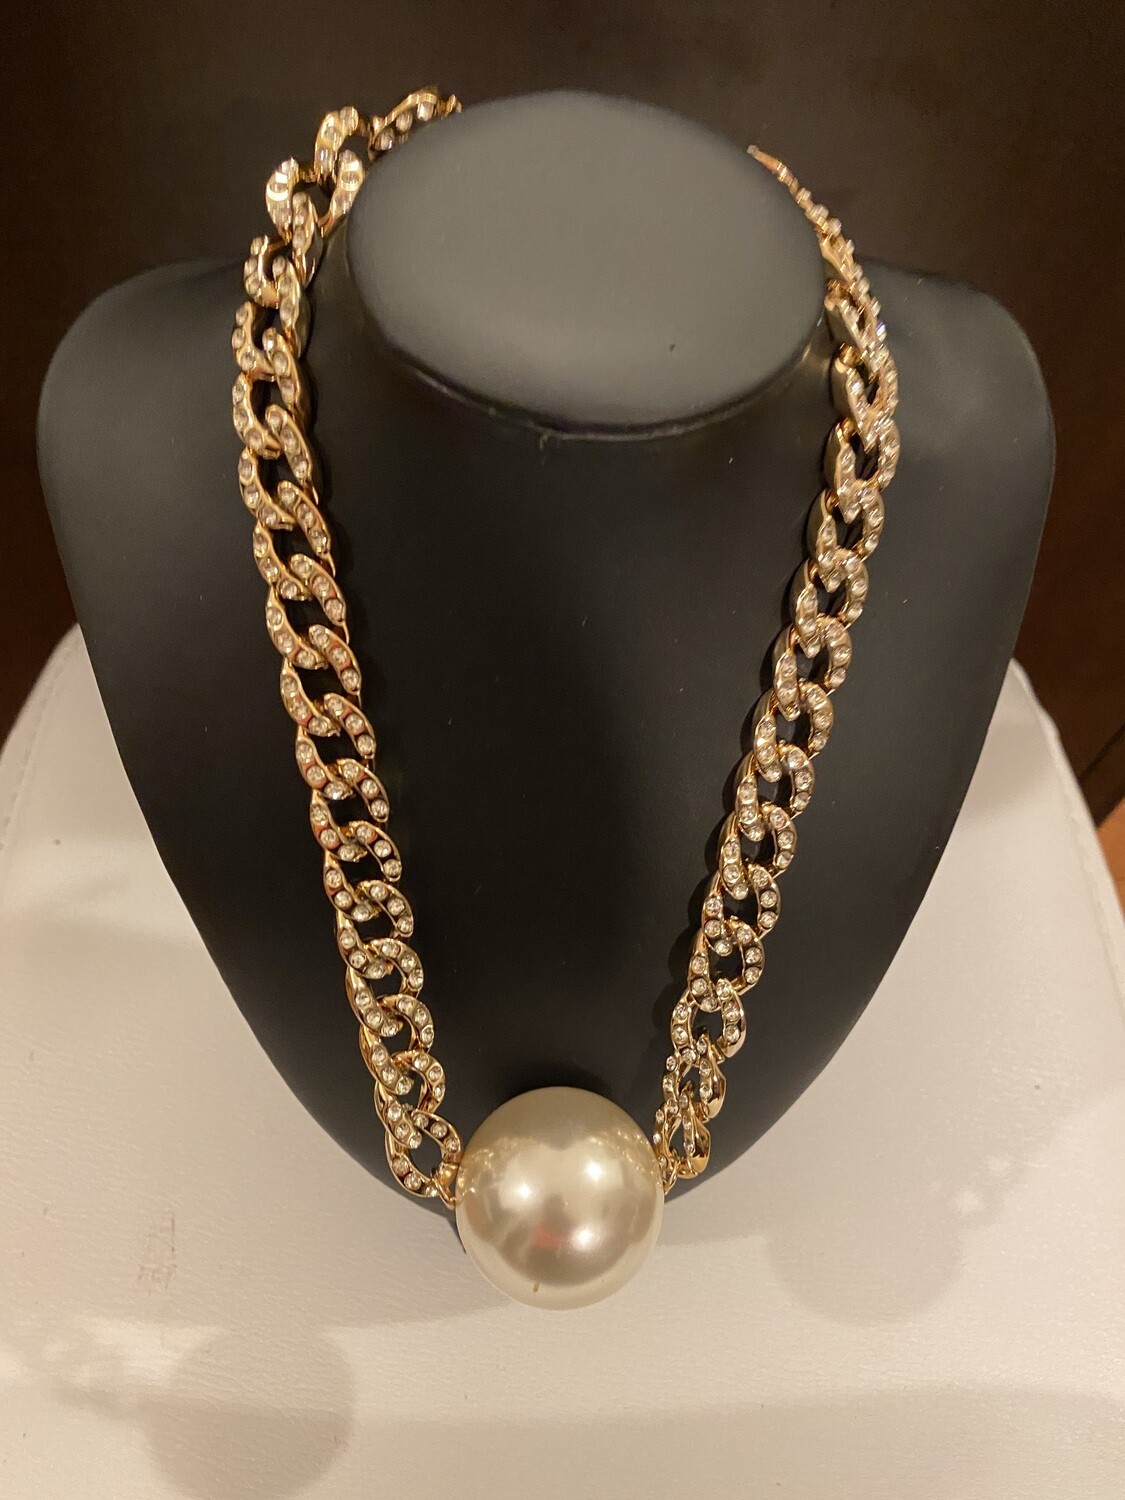 Single Pearl Rhinestone Chain Necklace| Unique Jewelry| Birthday Gifts| Trendy Accessories| Valentine's Day Gifts